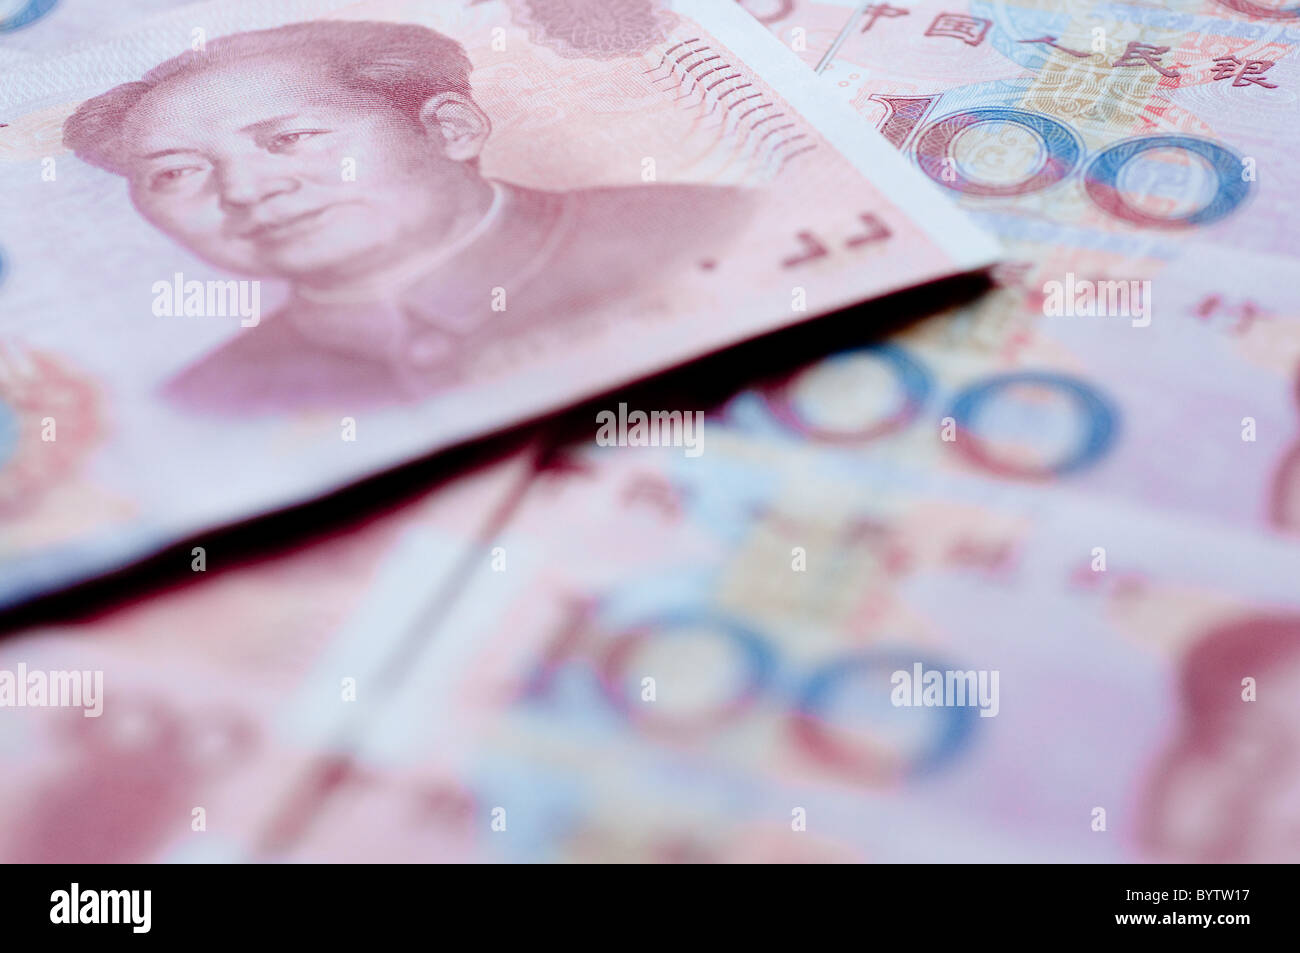 brand new 100 RMB Chinese bank notes showing the image of the late chairman Mao, arranged side by side and on top of each other Stock Photo